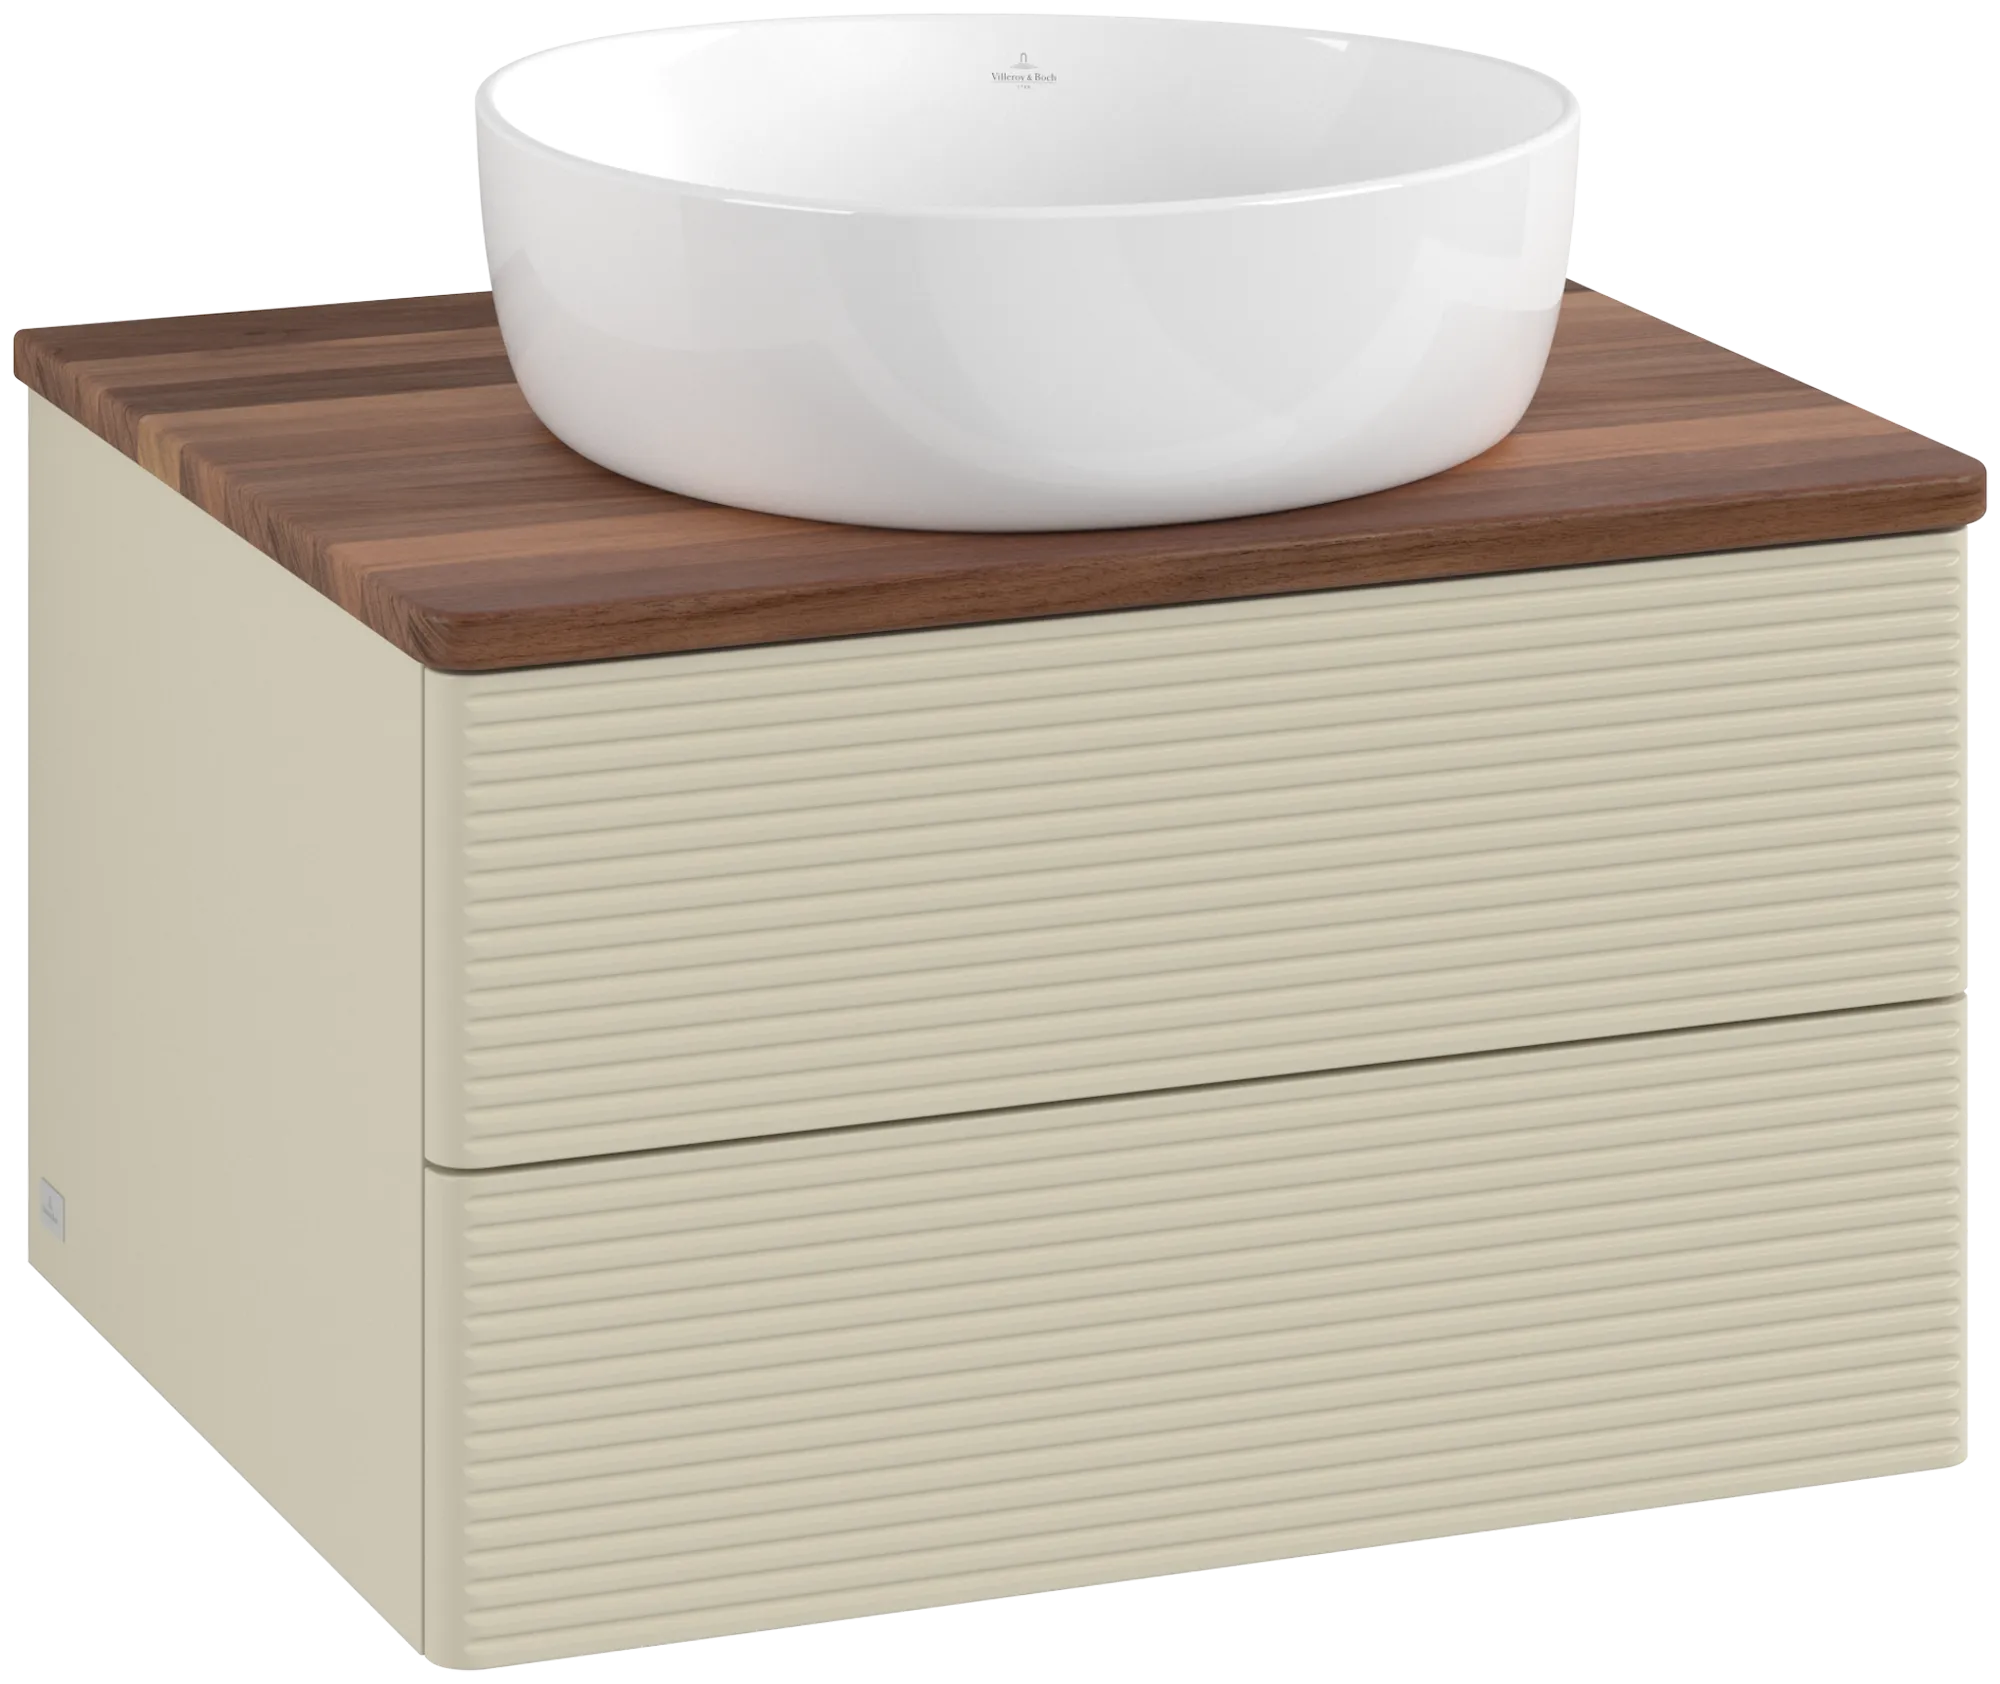 Picture of VILLEROY BOCH Antao Vanity unit, with lighting, 2 pull-out compartments, 600 x 360 x 500 mm, Front with grain texture, Silk Grey Matt Lacquer / Warm Walnut #L18112HJ